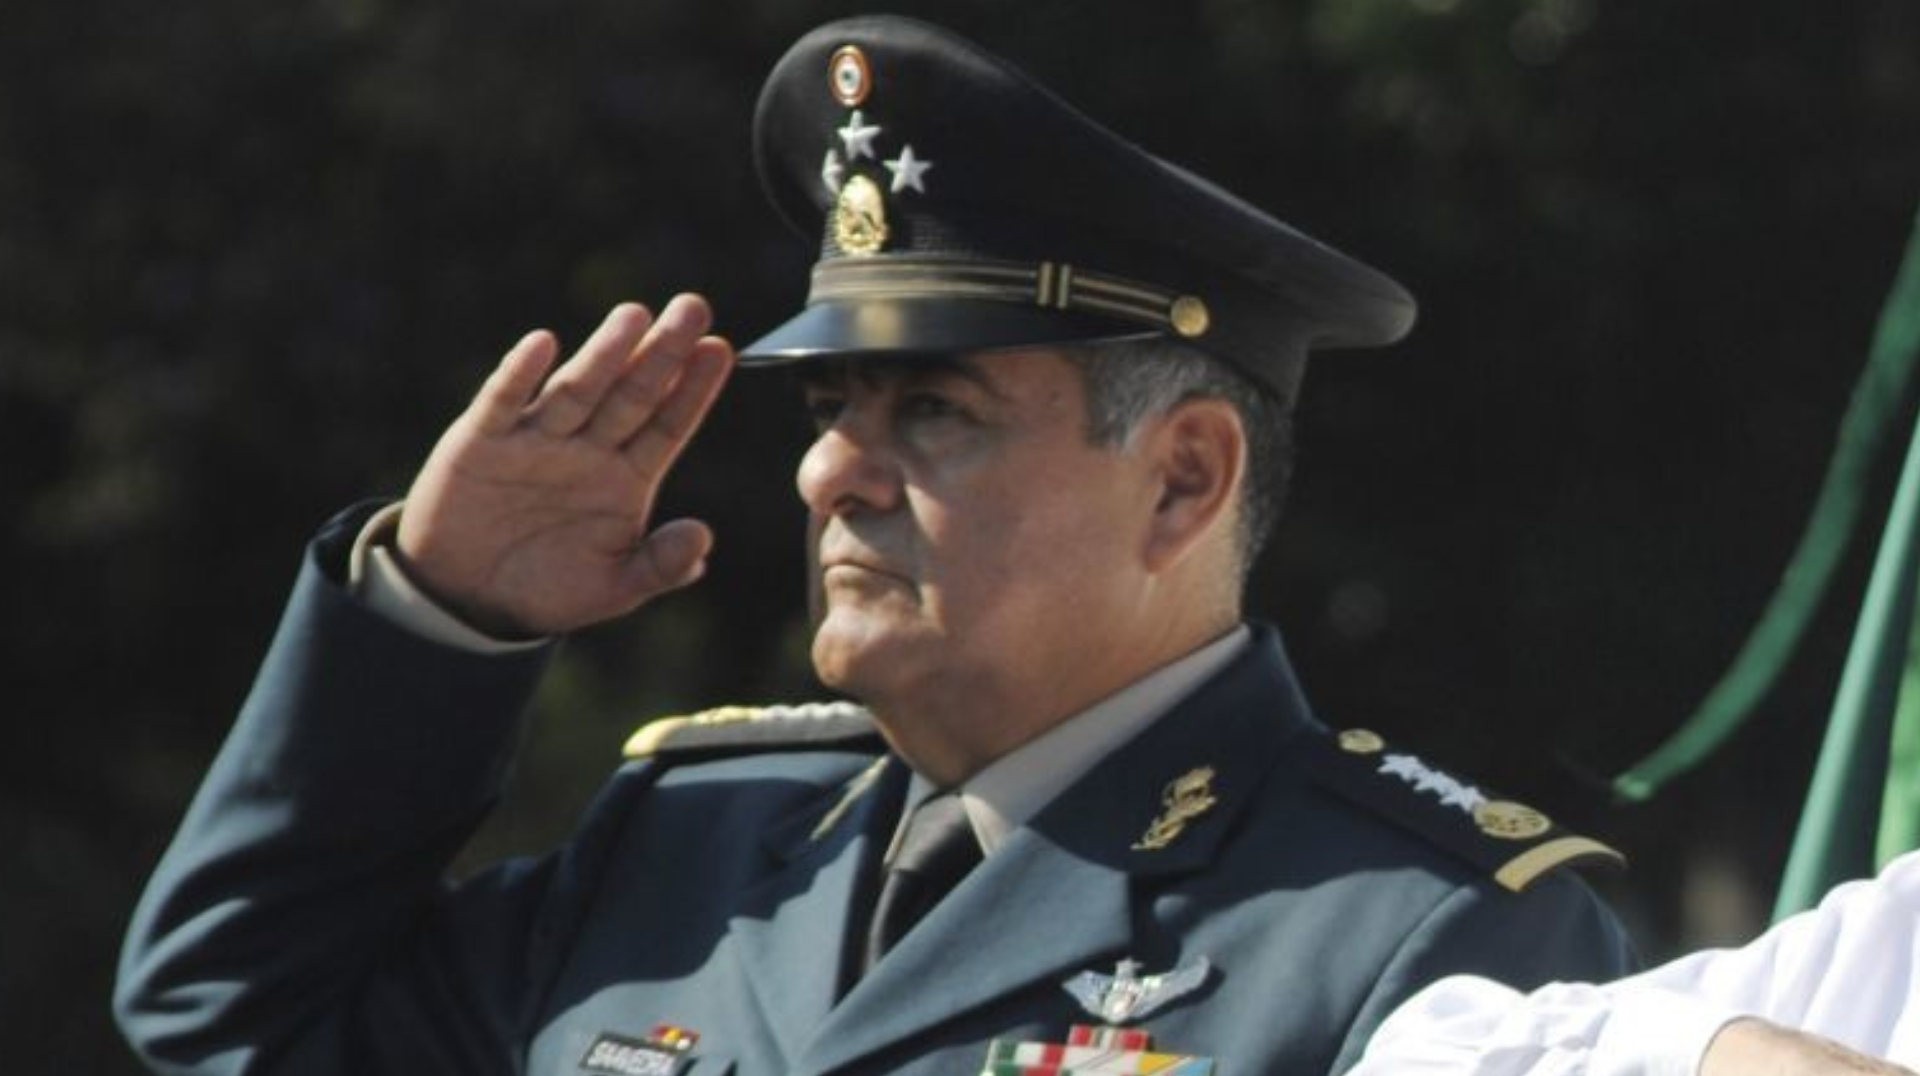 Alejandro Saavedra Hernández has been identified as one of the highest-ranking soldiers involved in the Ayotzinapa Case. (Photo: CUARTOSCURO)